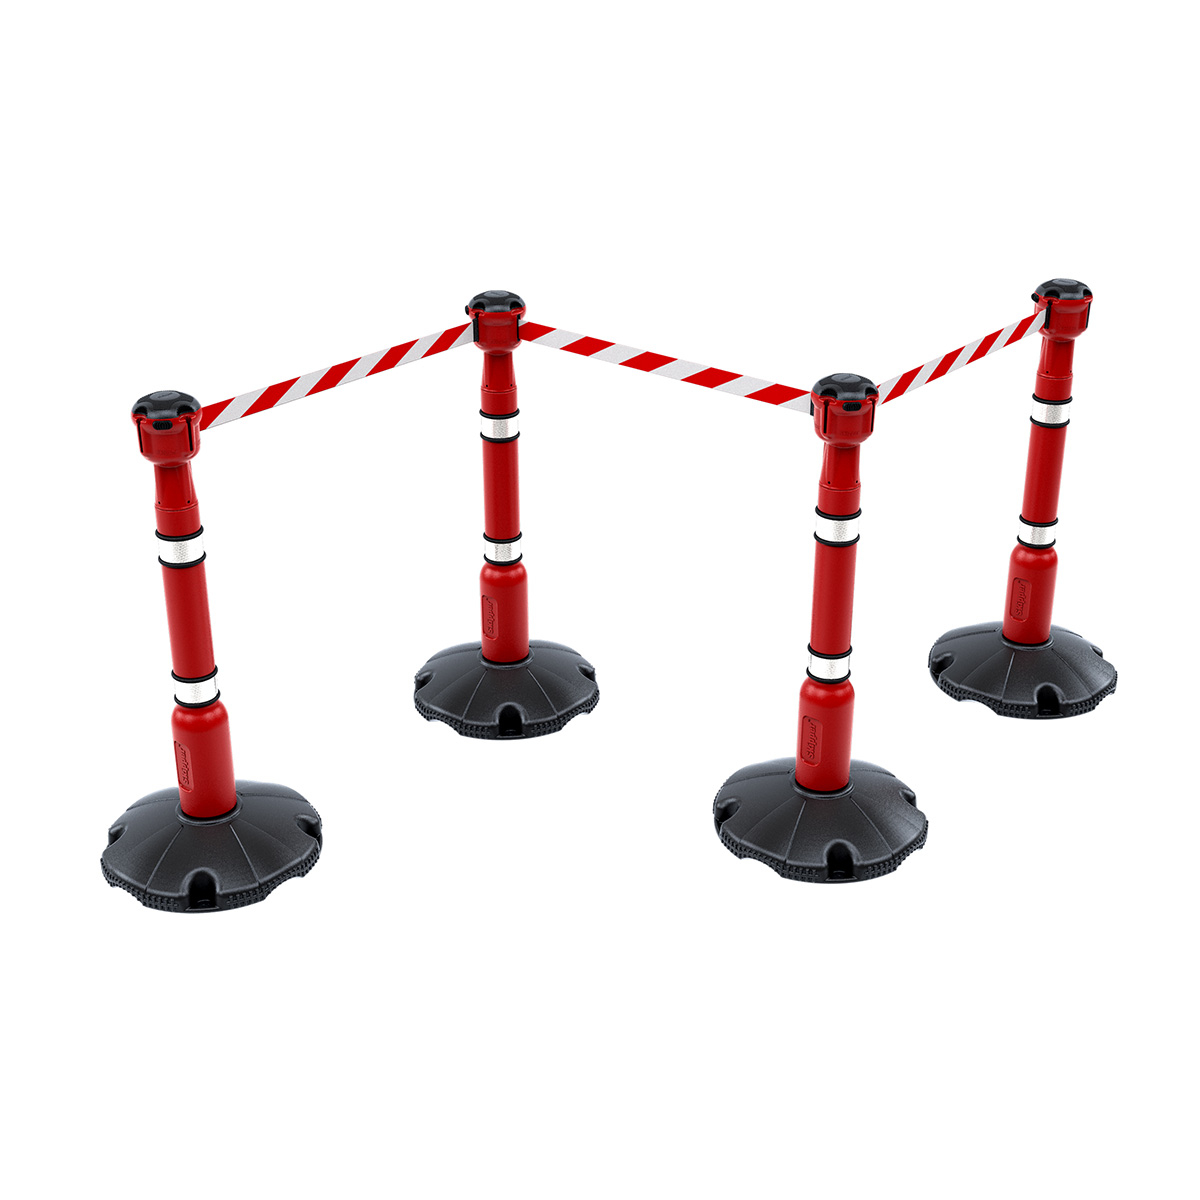 Skipper™ Portable Safety Barrier Kit 27m in Red With Red And White Chevron Fabric Tape